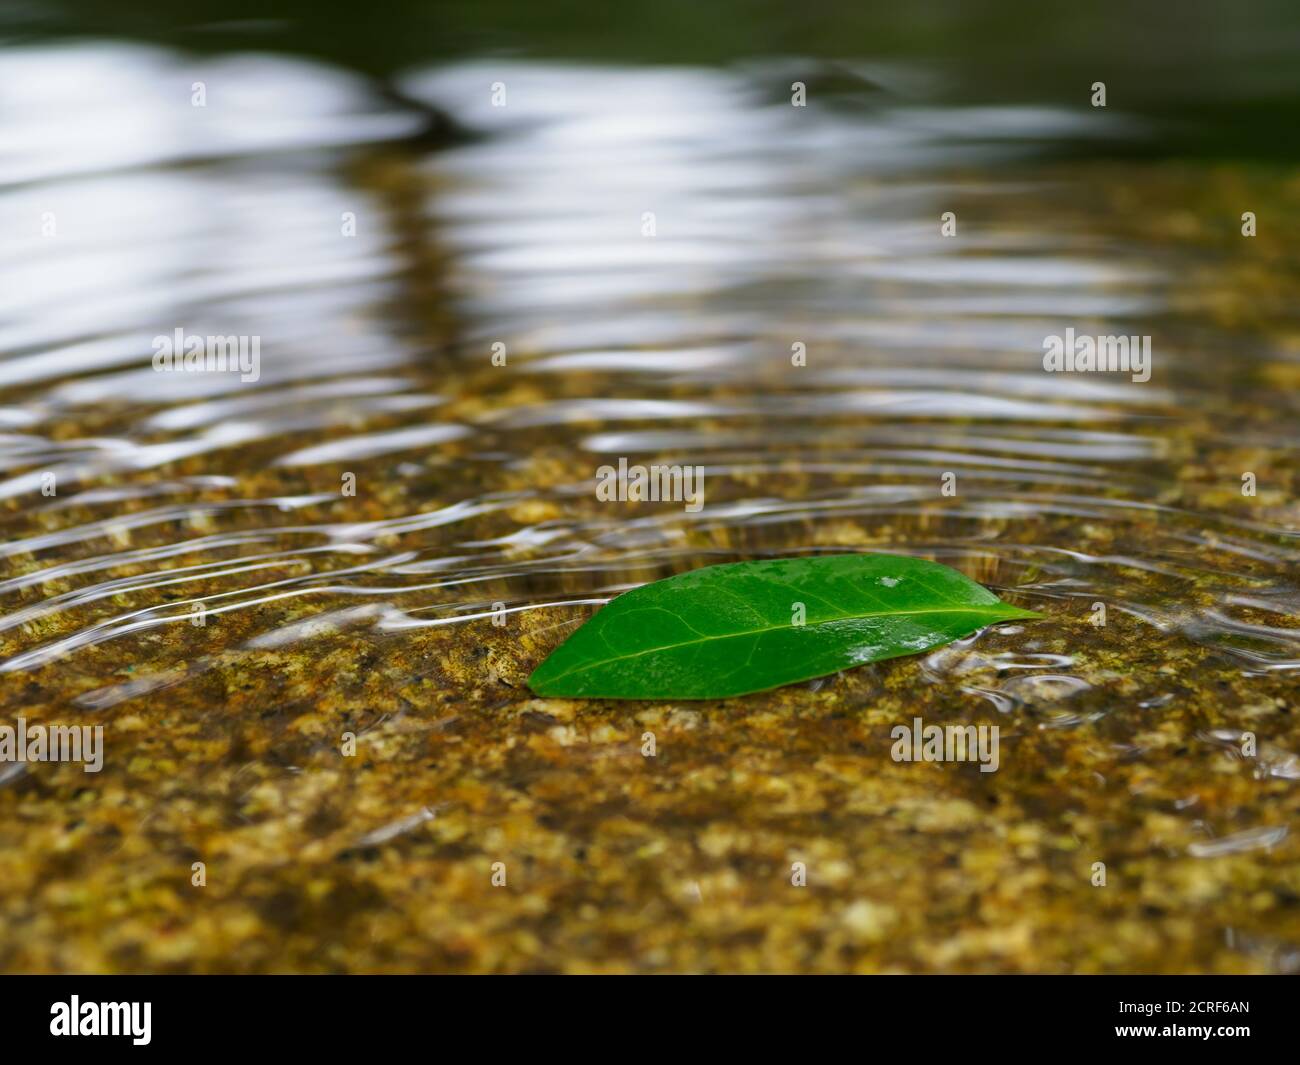 A green leaf floating in a pond Stock Photo